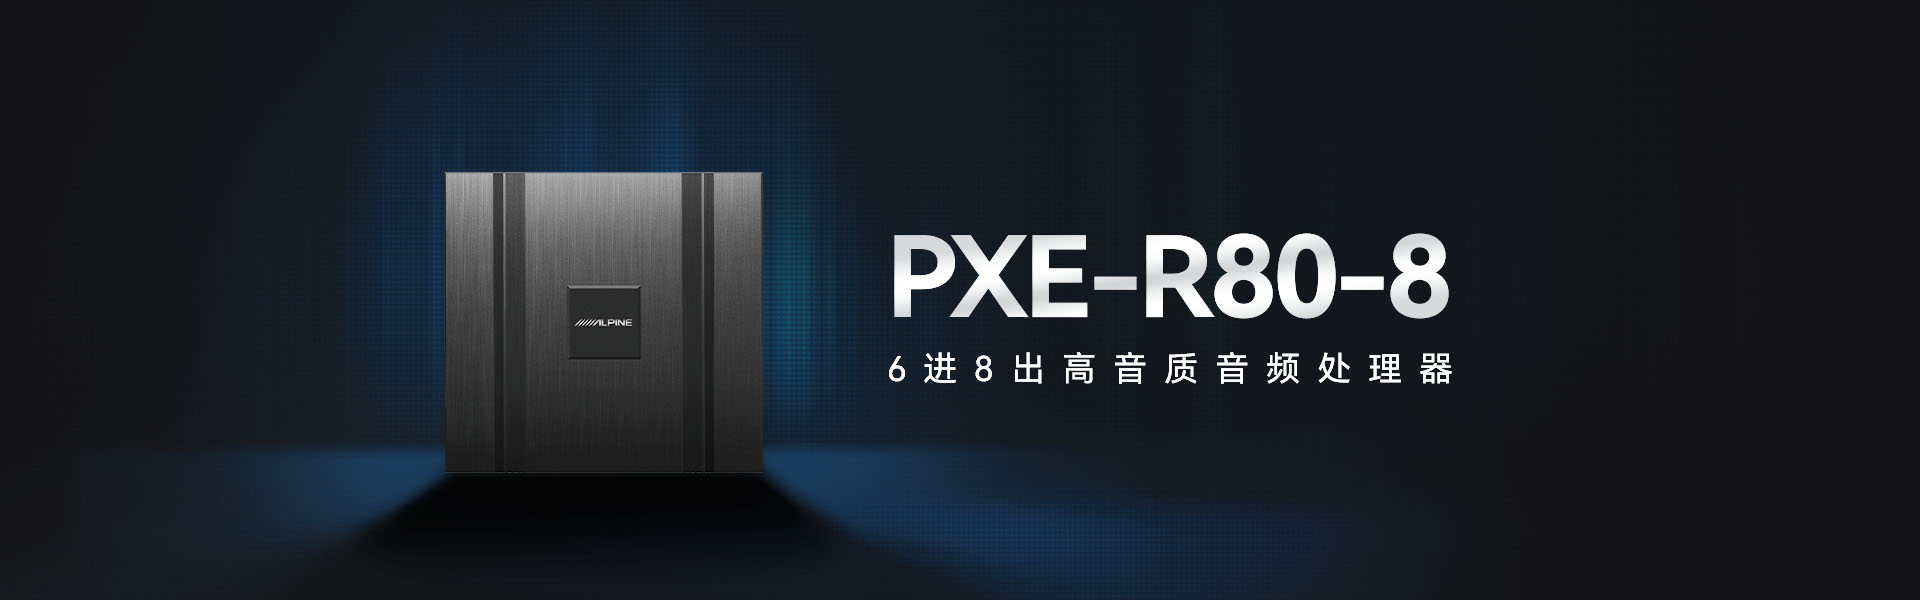 PXE-R80-8